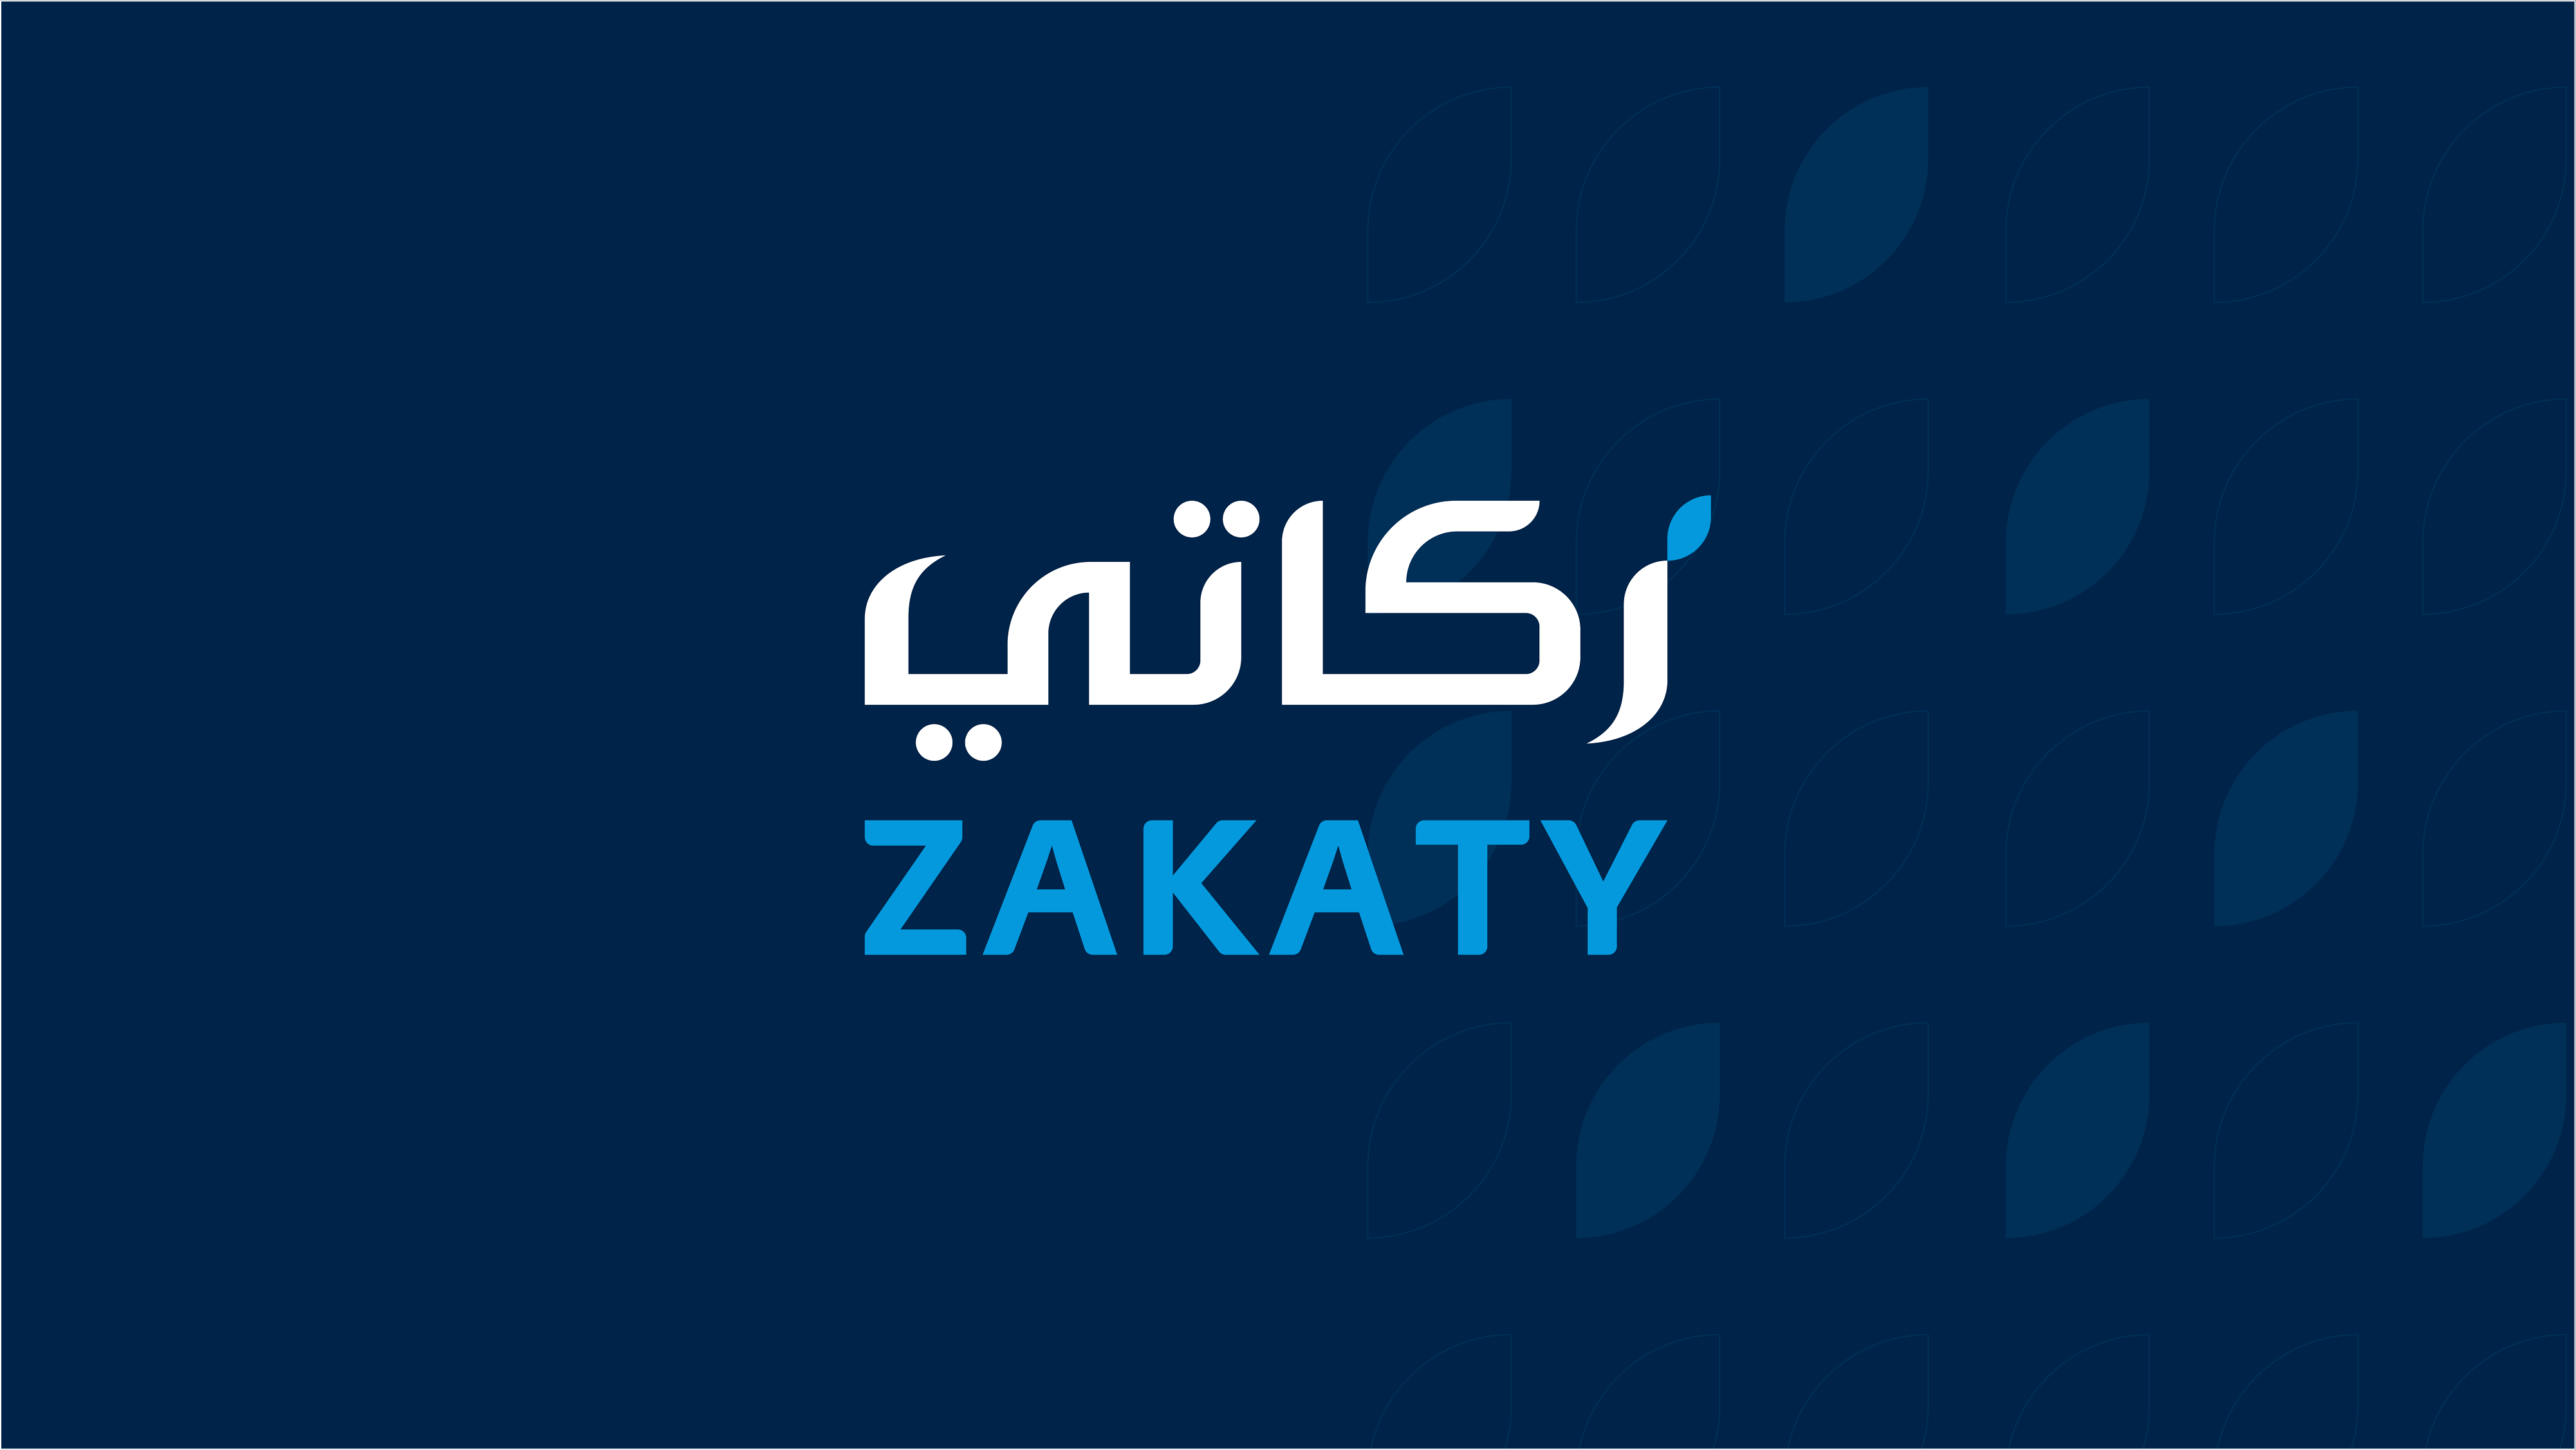 ZATCA allows “Zakaty” Service for 6th Year in a Row